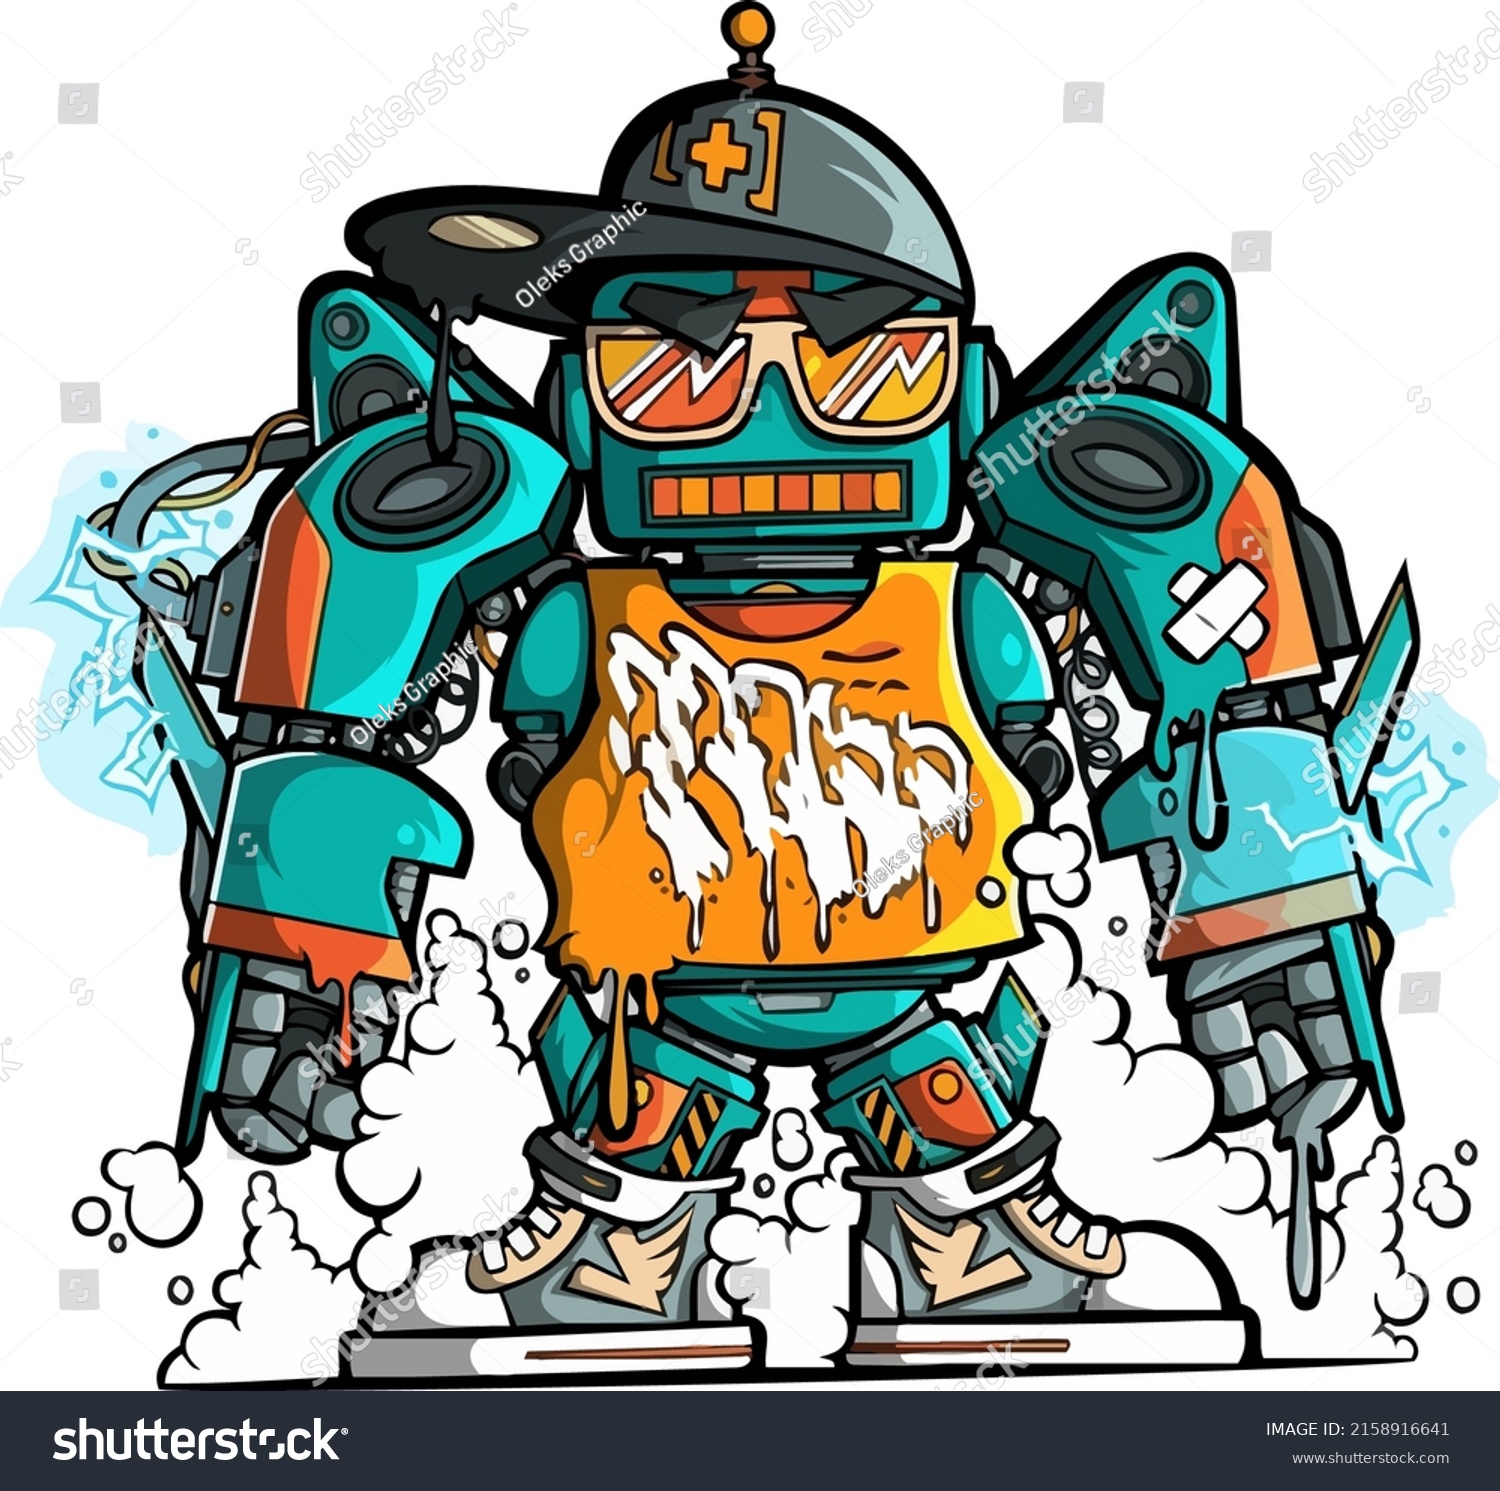 14,788 Cool robot toy Images, Stock Photos & Vectors | Shutterstock